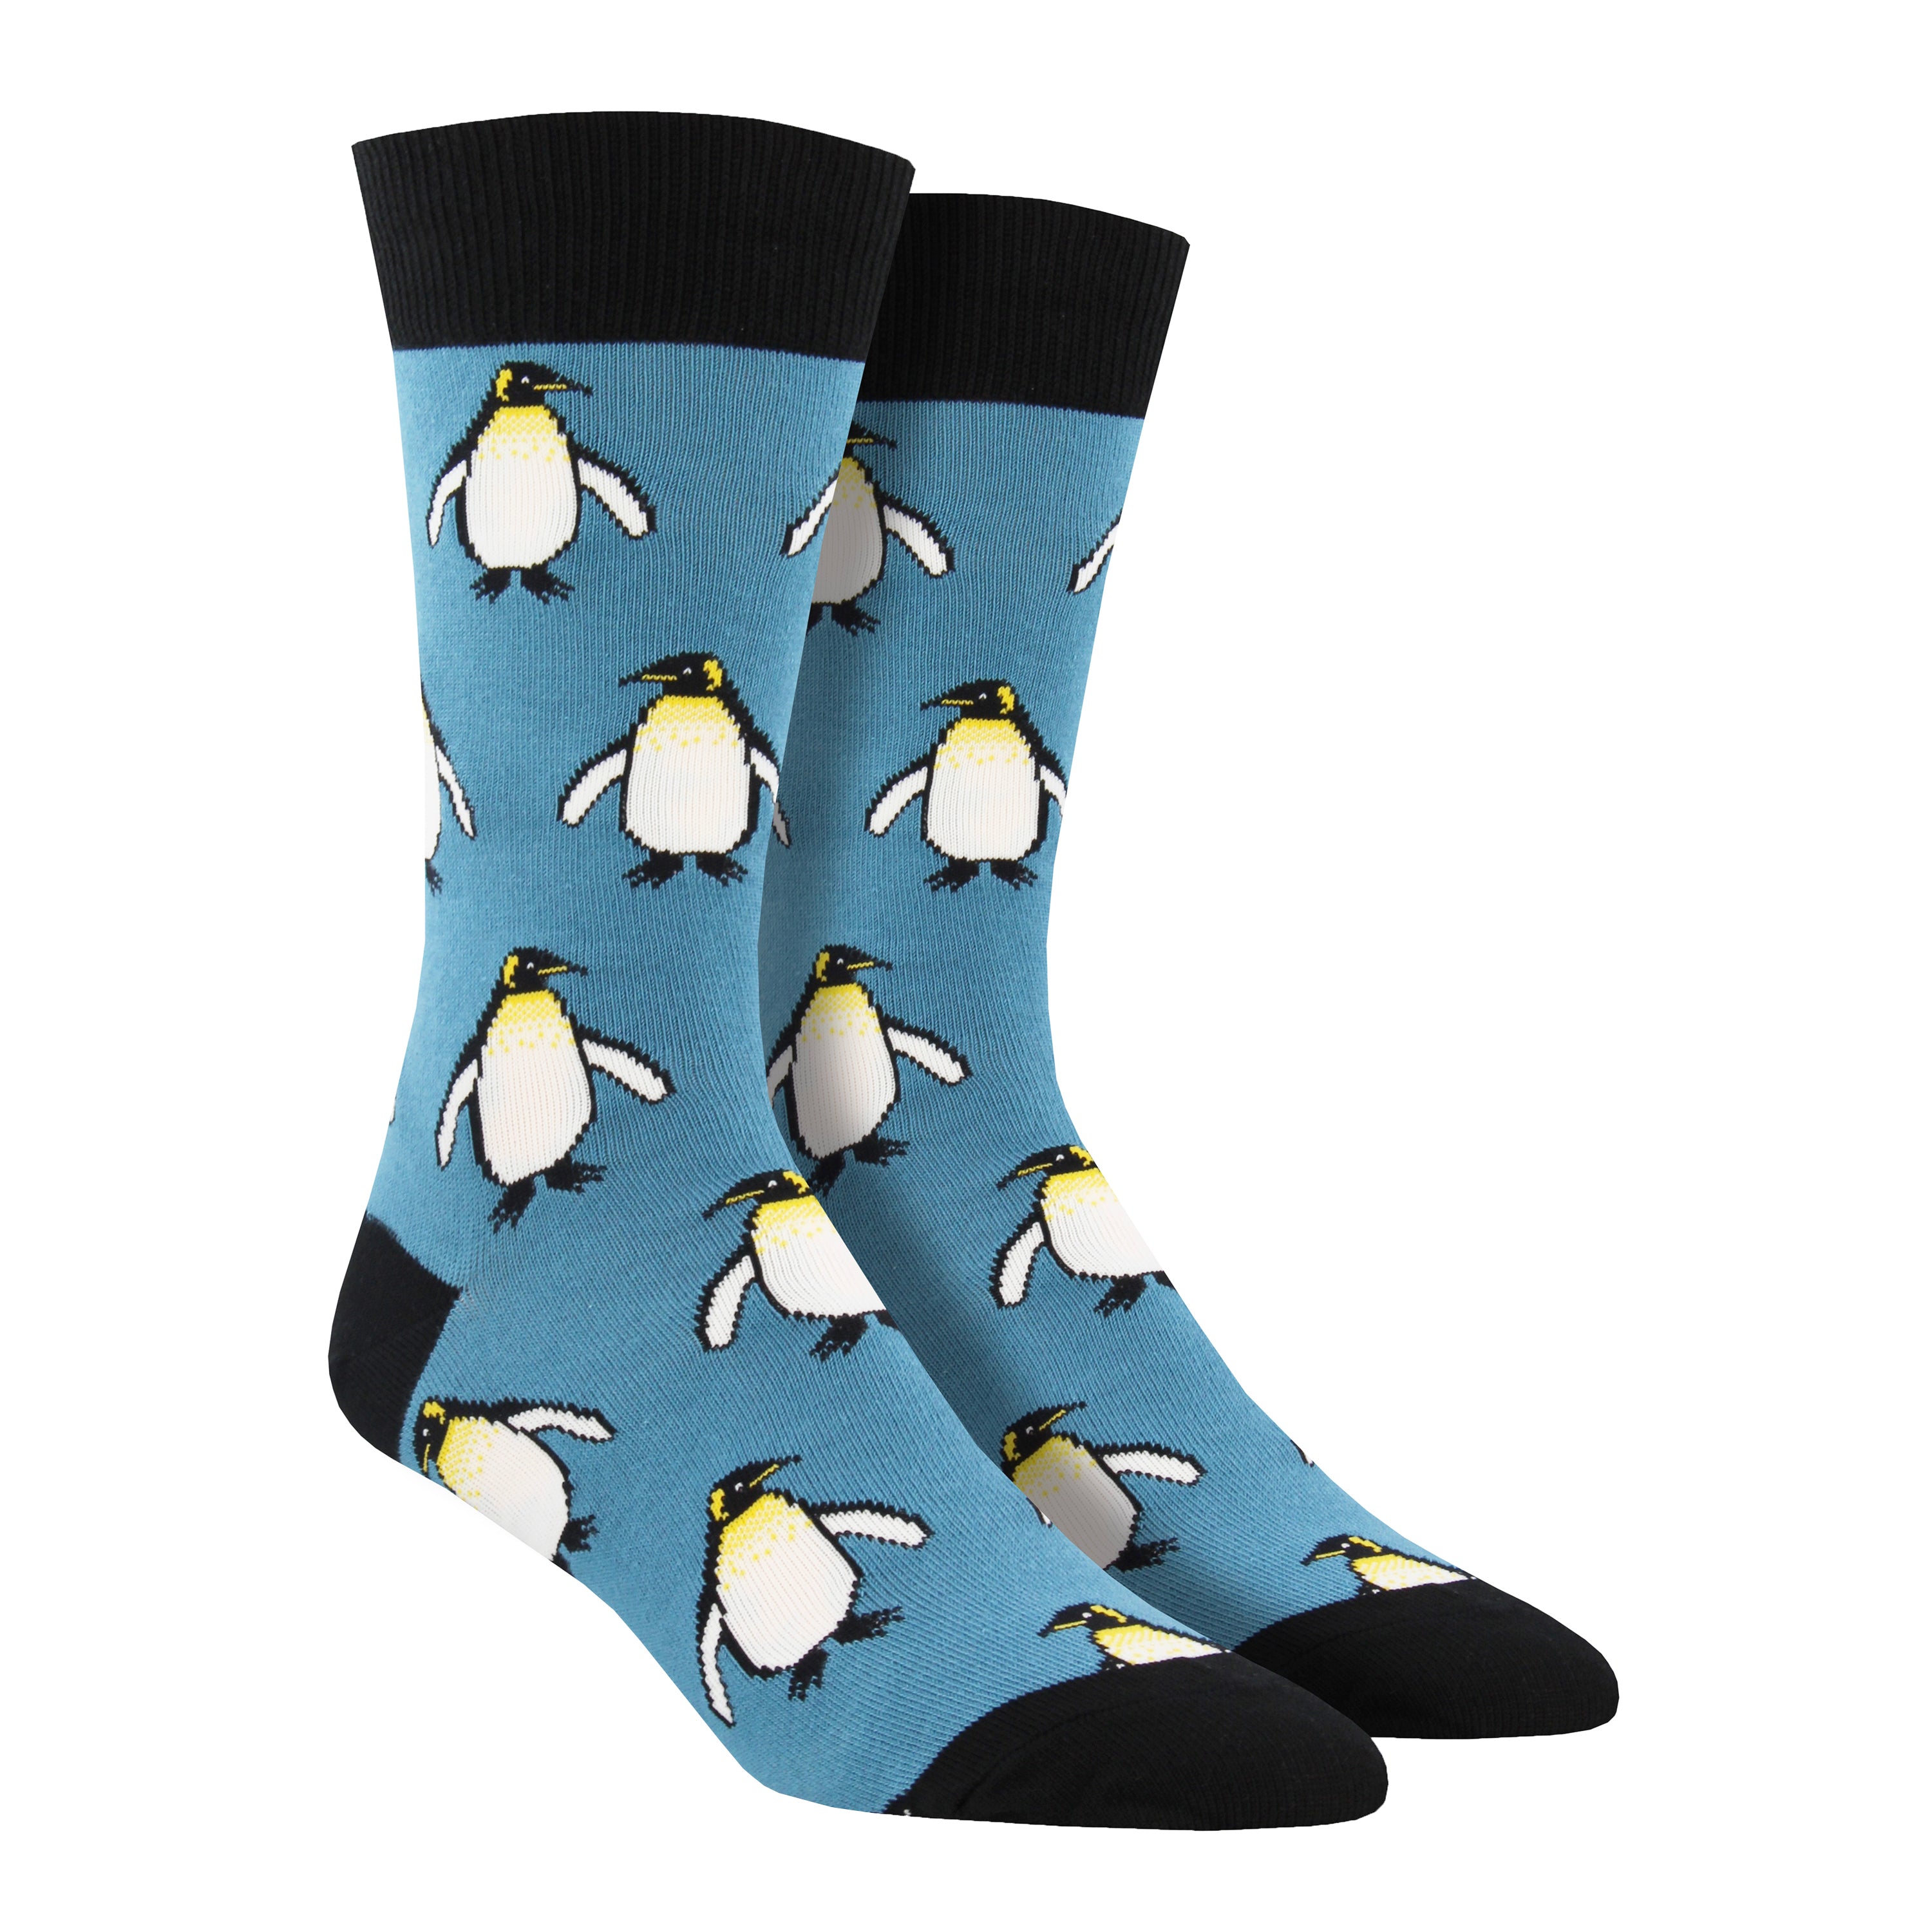 Shown on a foot form, a pair of Socksmith's blue cotton men's crew socks with black cuff/heel/toe and all-over pattern regal emperor penguins